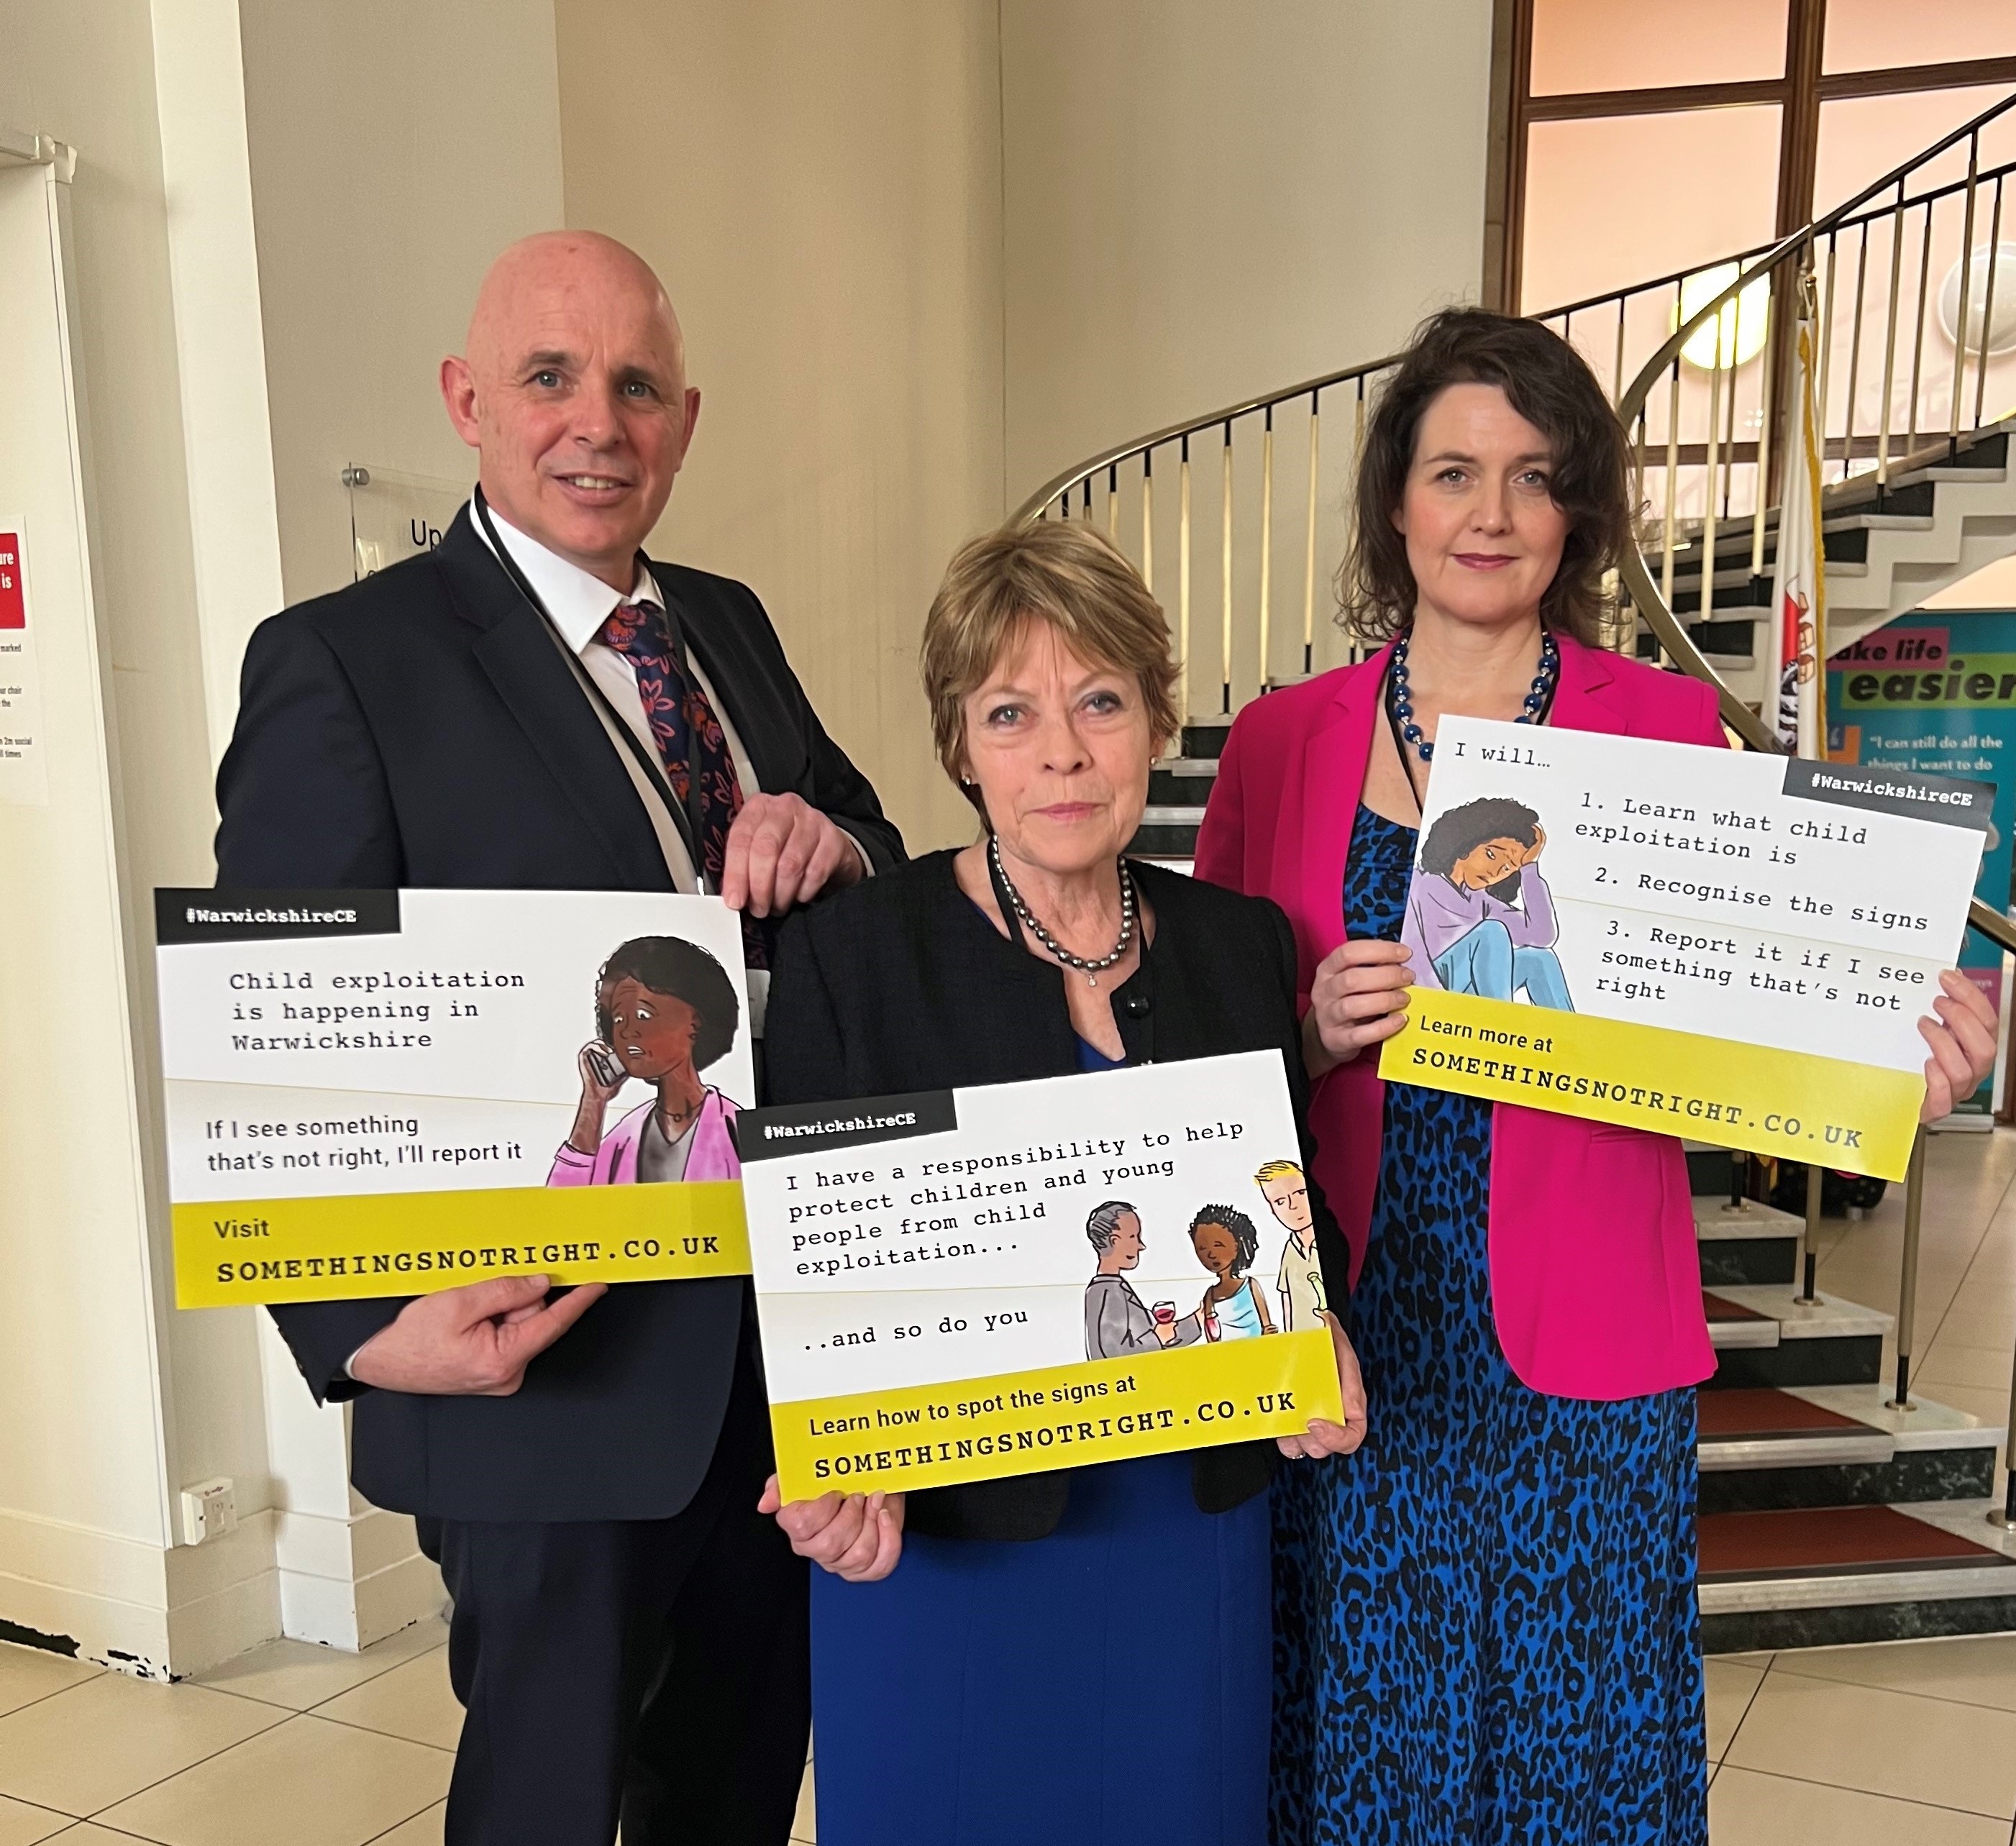 Cllr O'donnell, Cllr Seccombe and Cllr Spencer make pledges for Child Exploitation Awareness Day